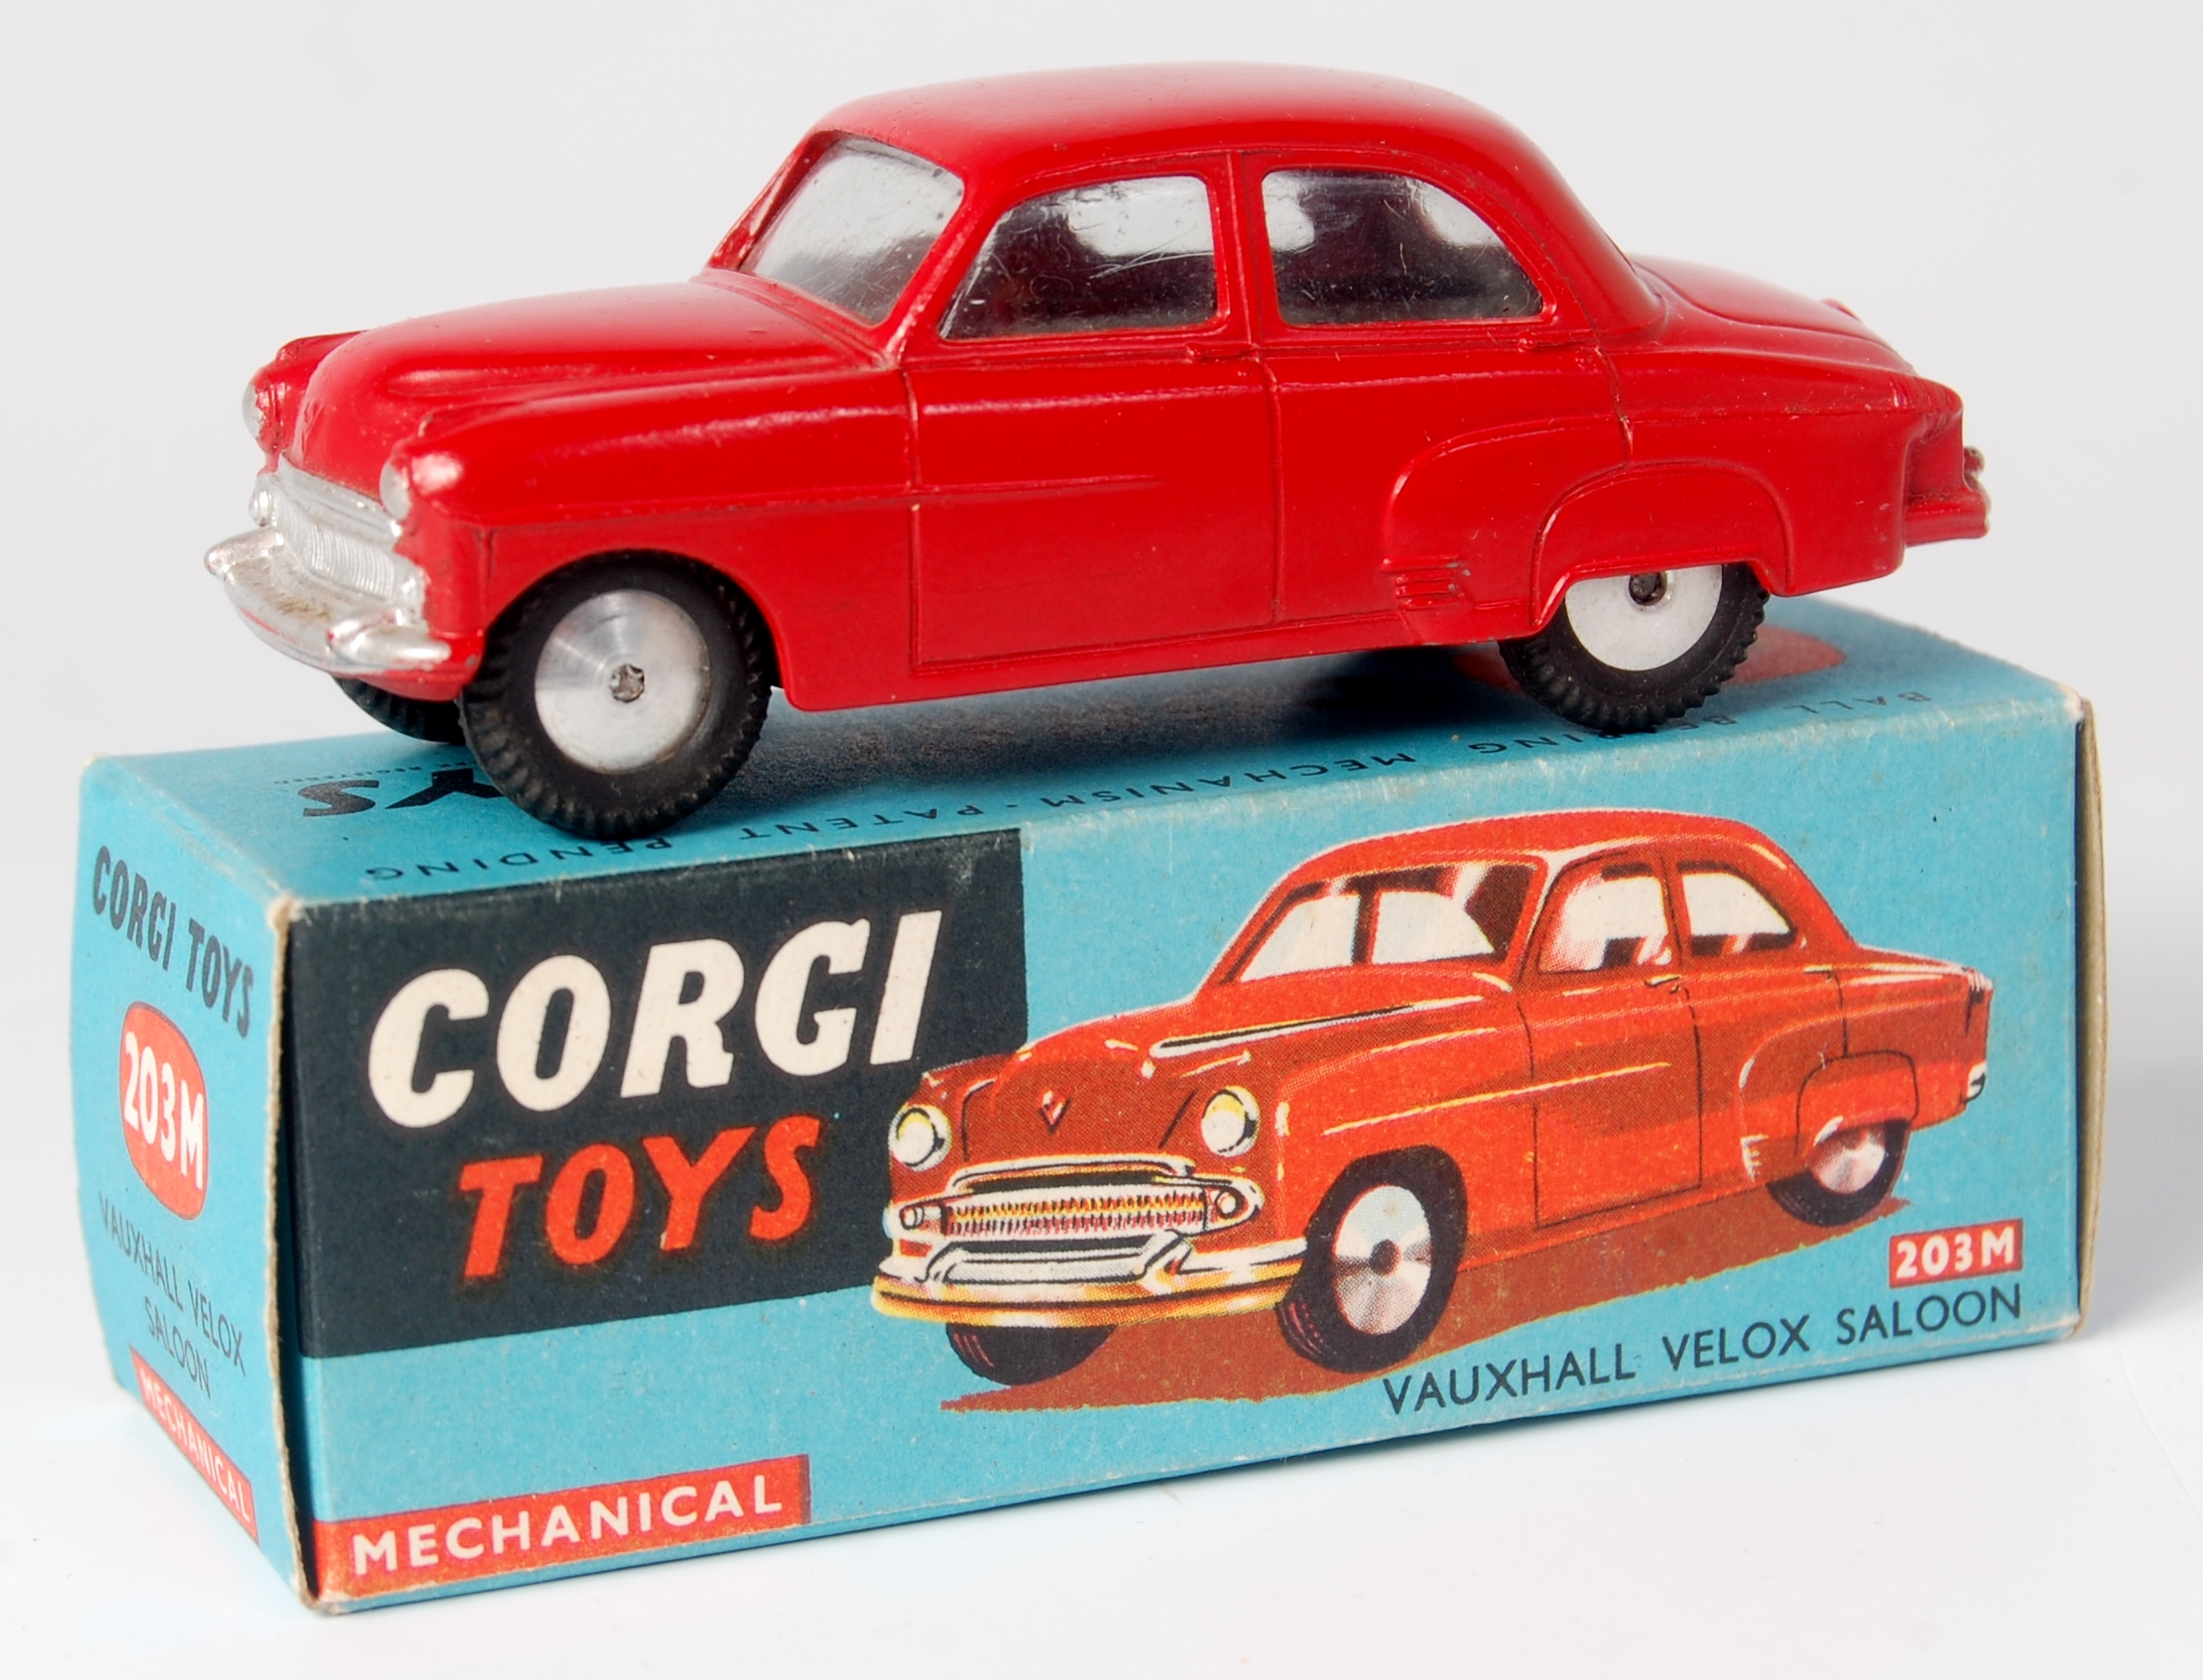 Corgi Toys, 203M Vauxhall Velox saloon, red body with silver detailed grille, flat spun hubs with